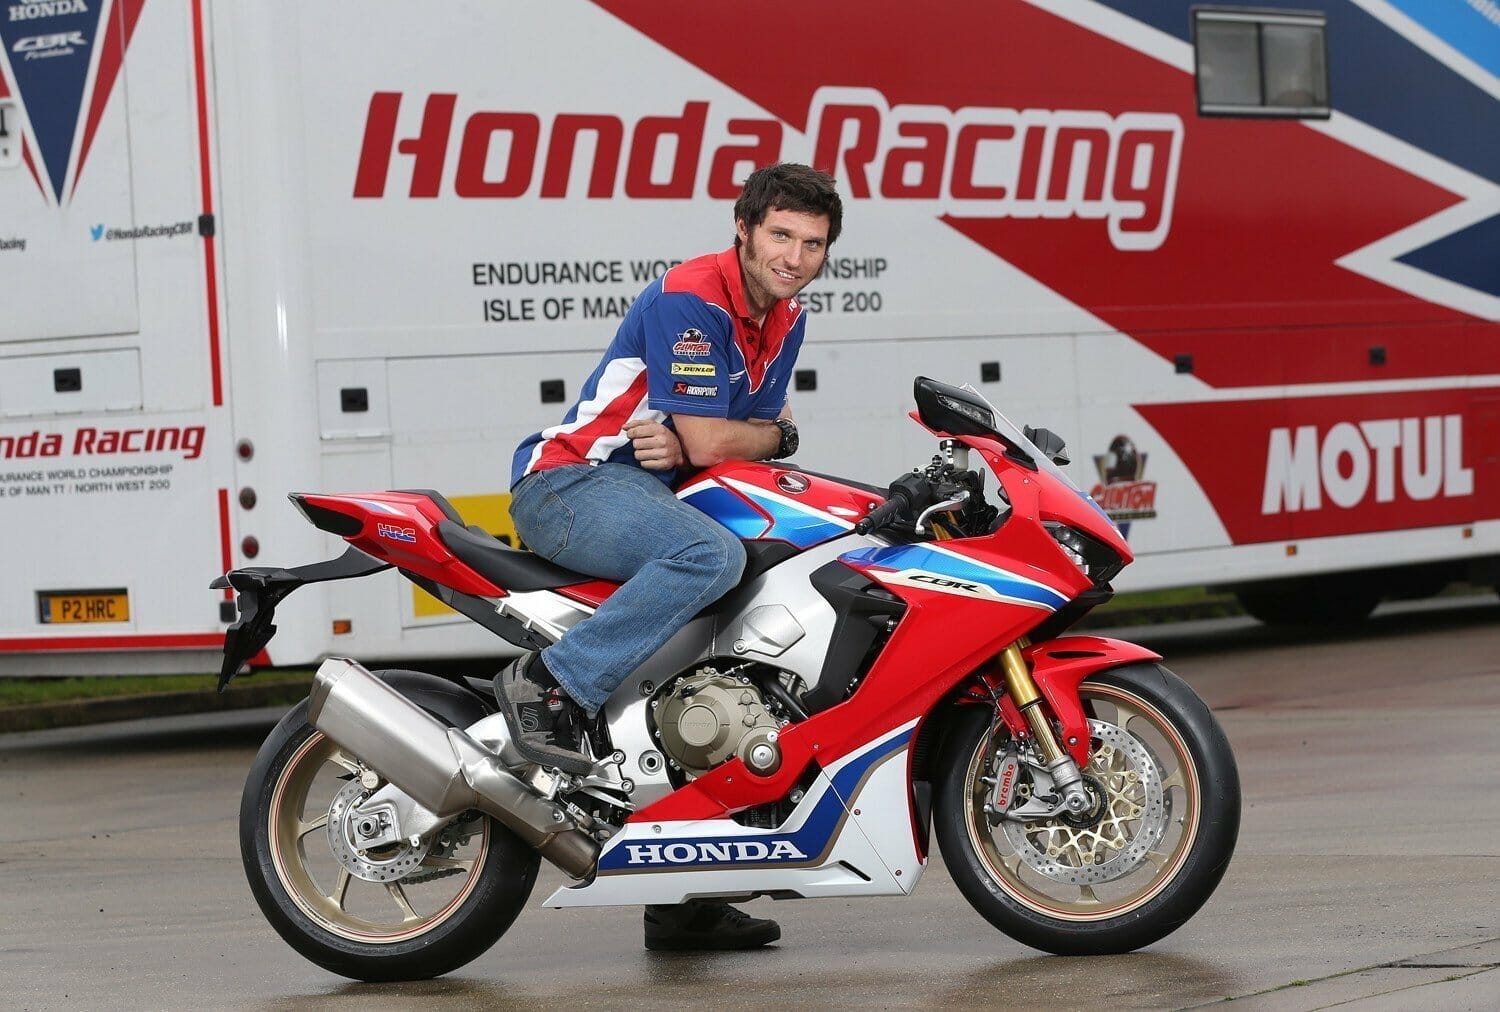 John McGuinness is not replaced, Guy Martin drives alone for Honda